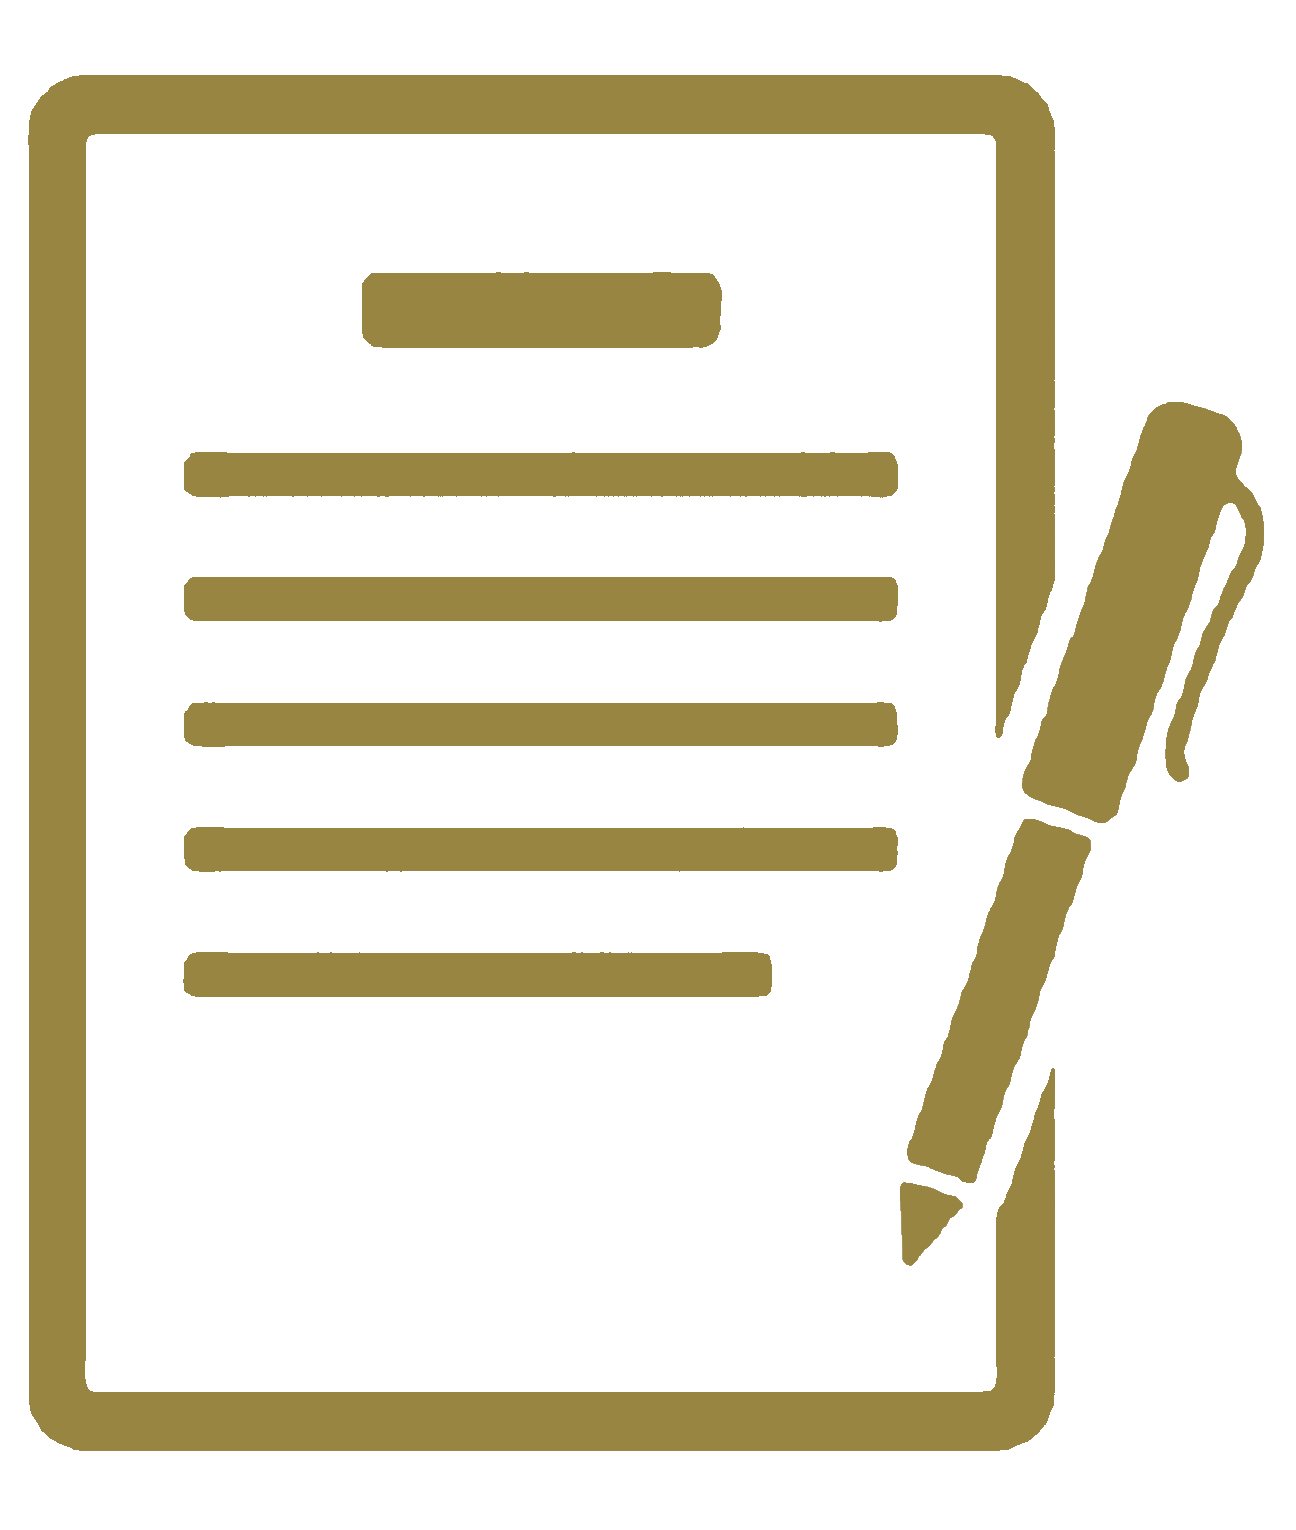 gold outline of document with pen